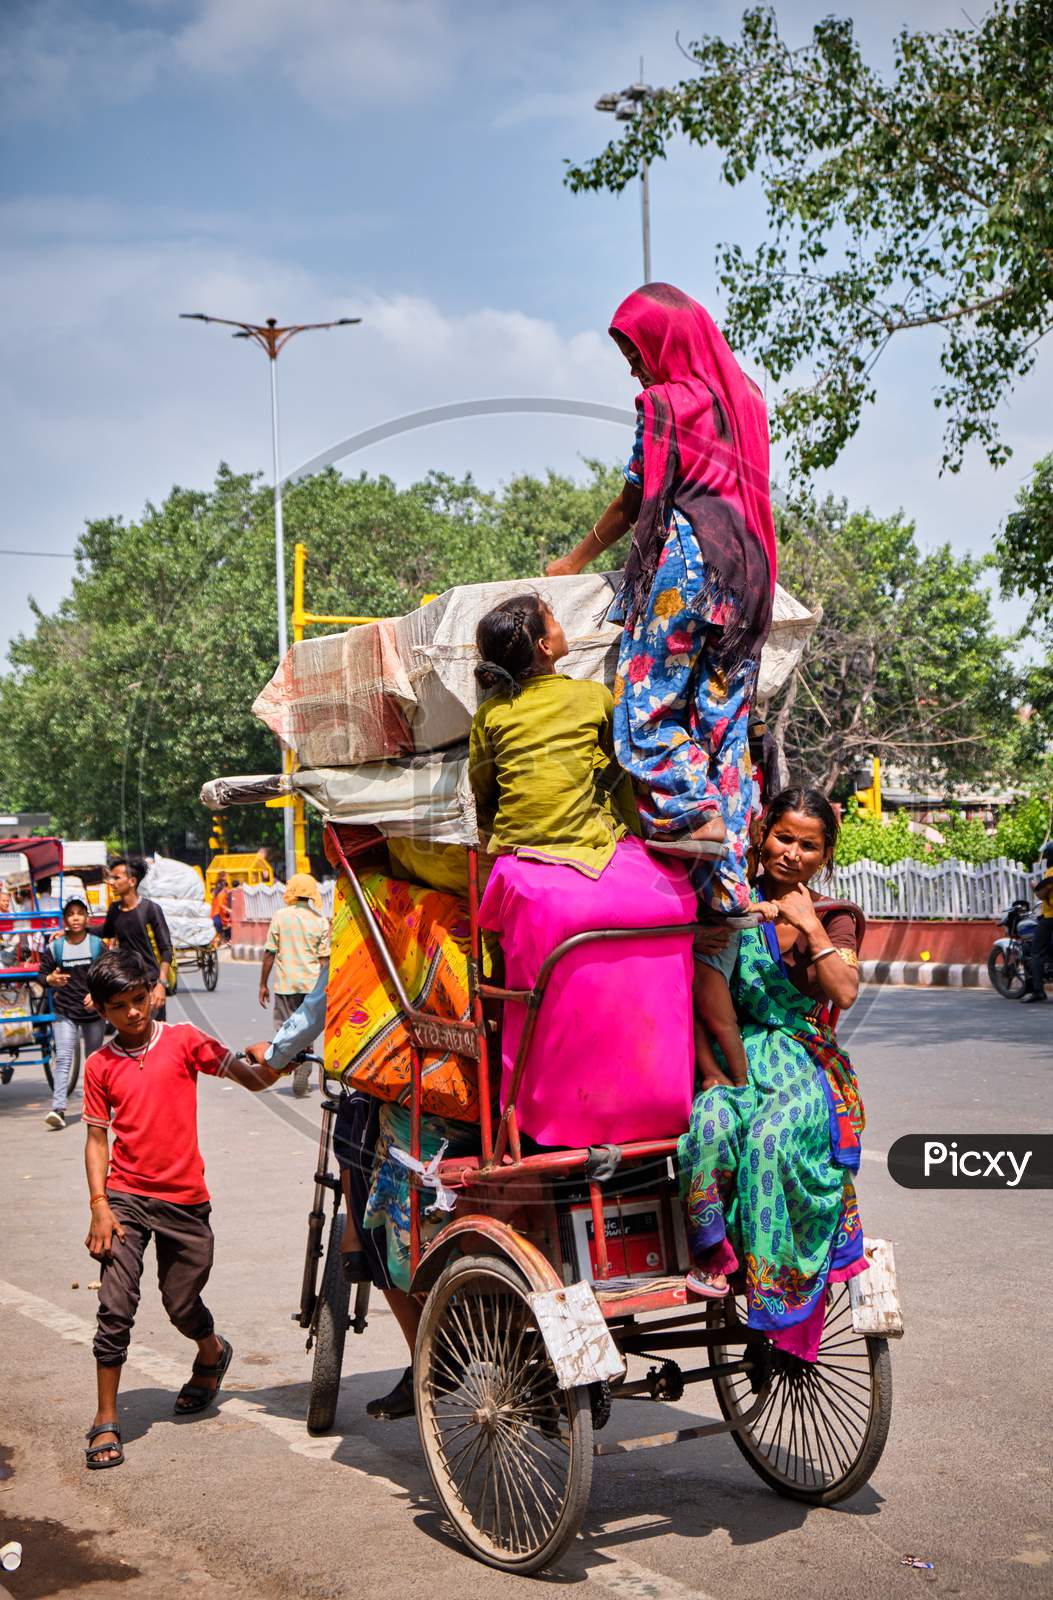 Family Of Several People Climbing On A Bicycle Rickshaw In New Delhi, India